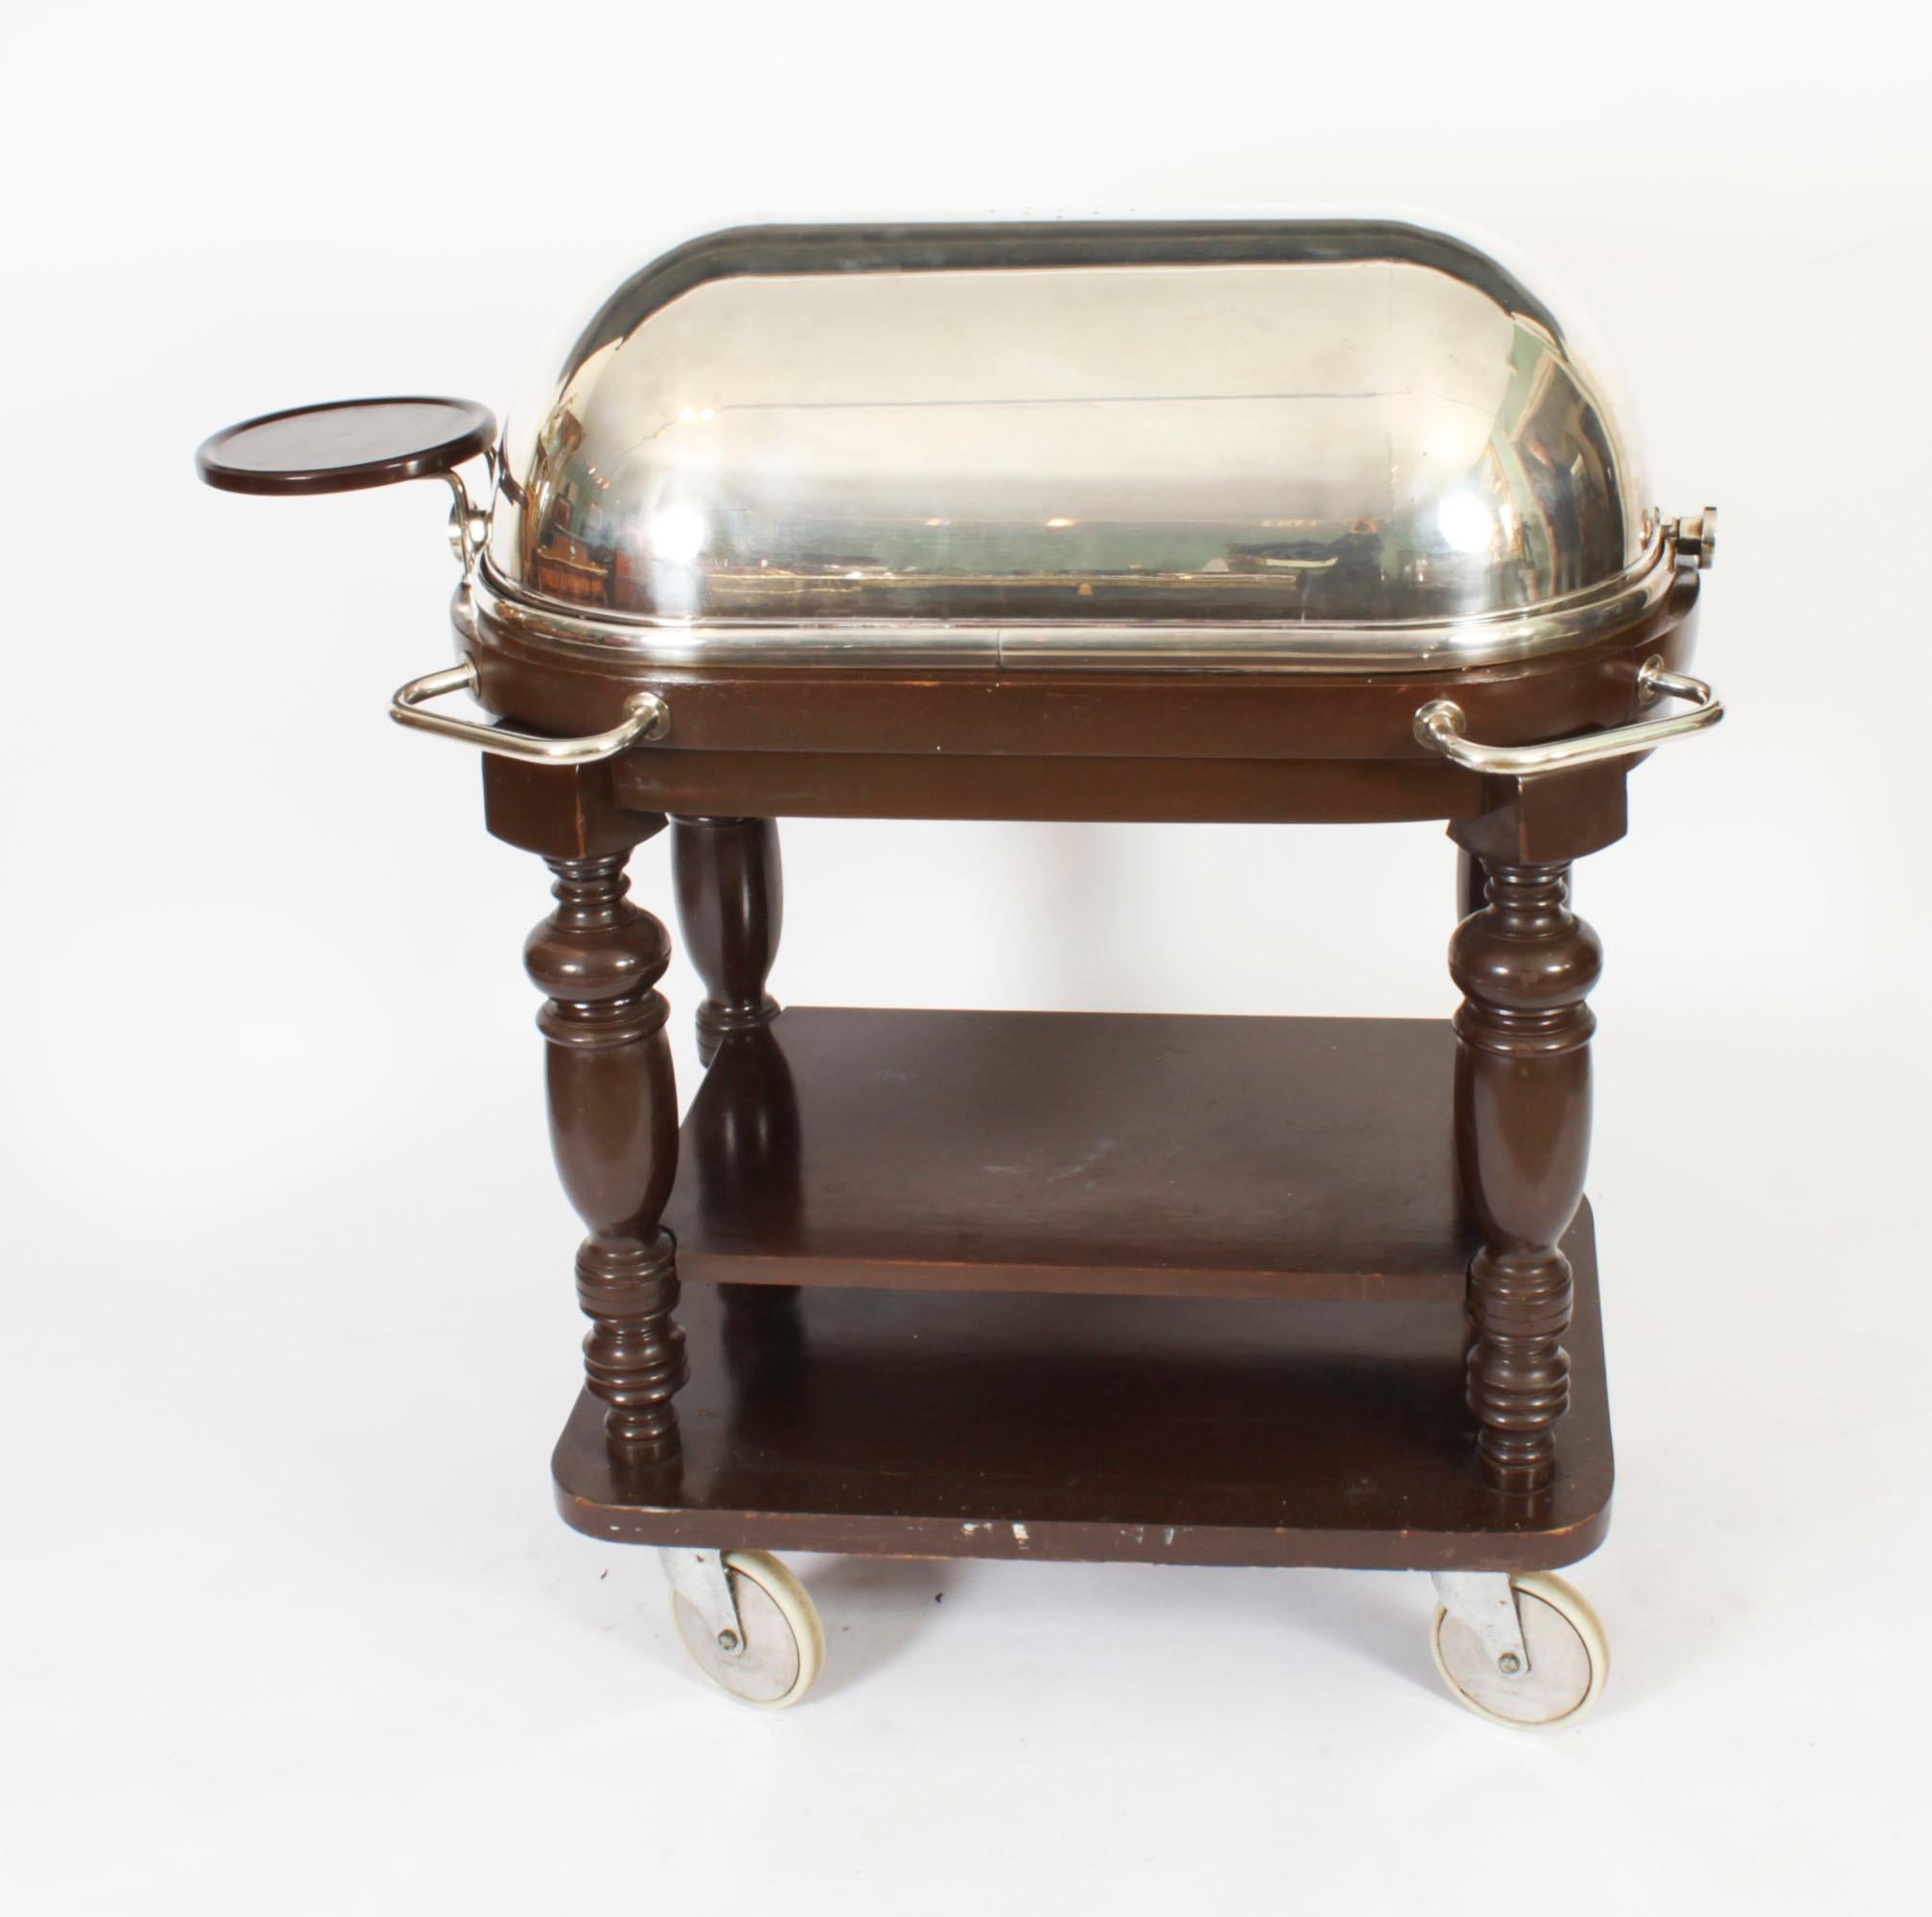 This is a magnificent and rare, Kaymet silver plated serving trolley with revolving dome, dating from the mid 20th Century.
 
​It is one of the most desirable models that they made, with the revolving dome which makes it very easy to use.

This